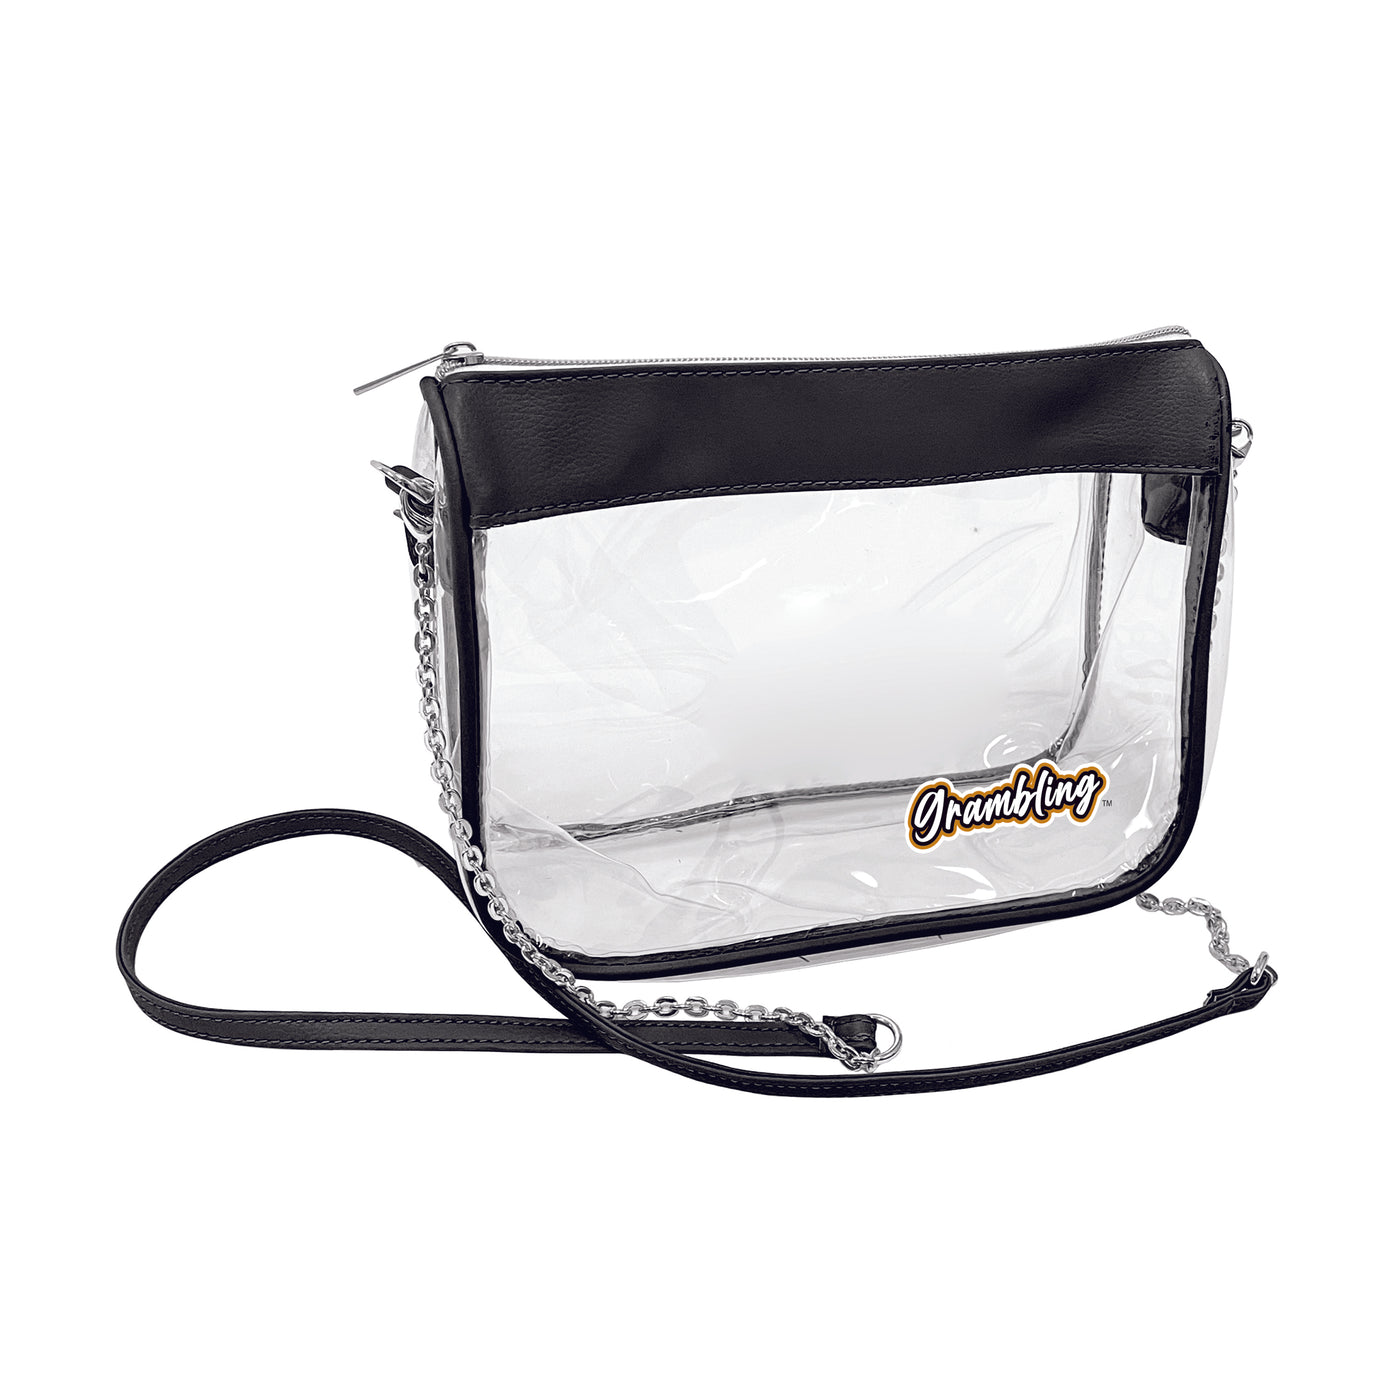 Grambling State Hype Clear Bag